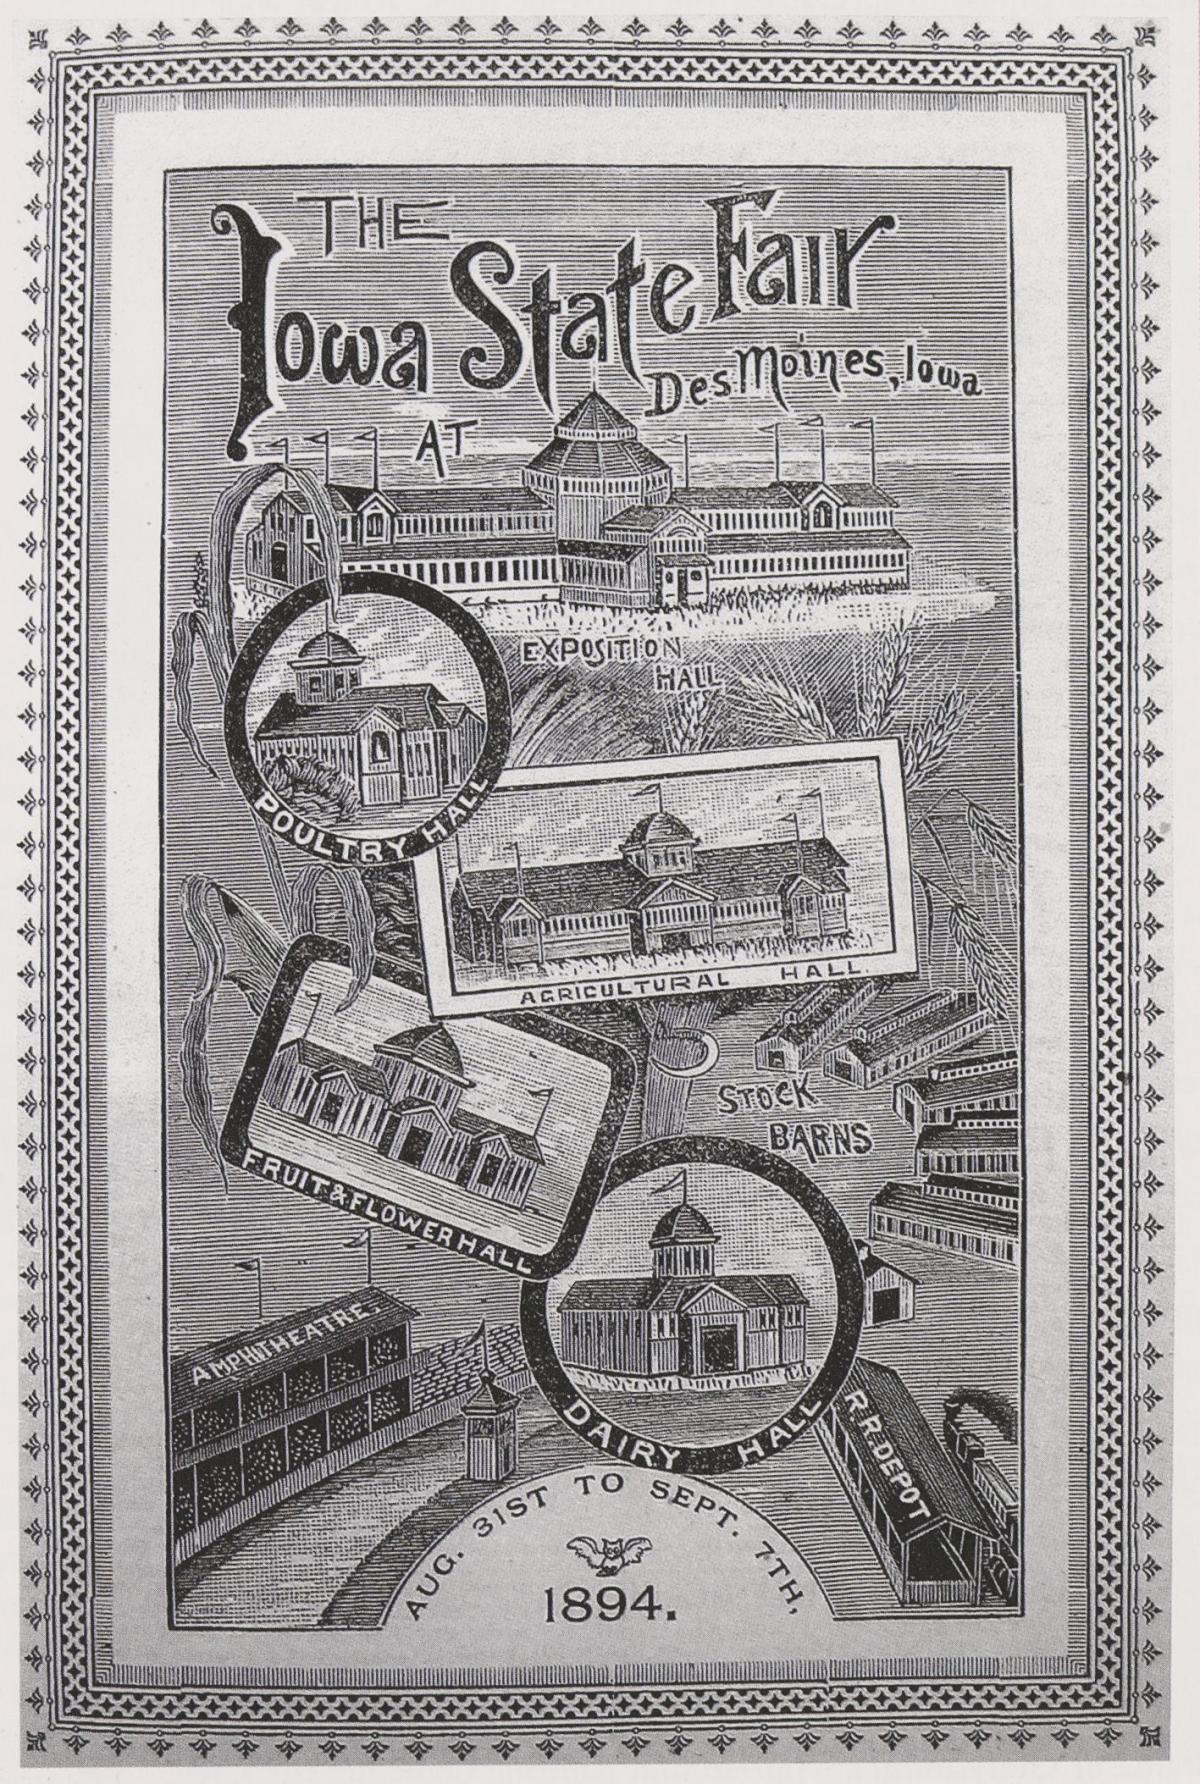 historical poster from the Iowa State Fair